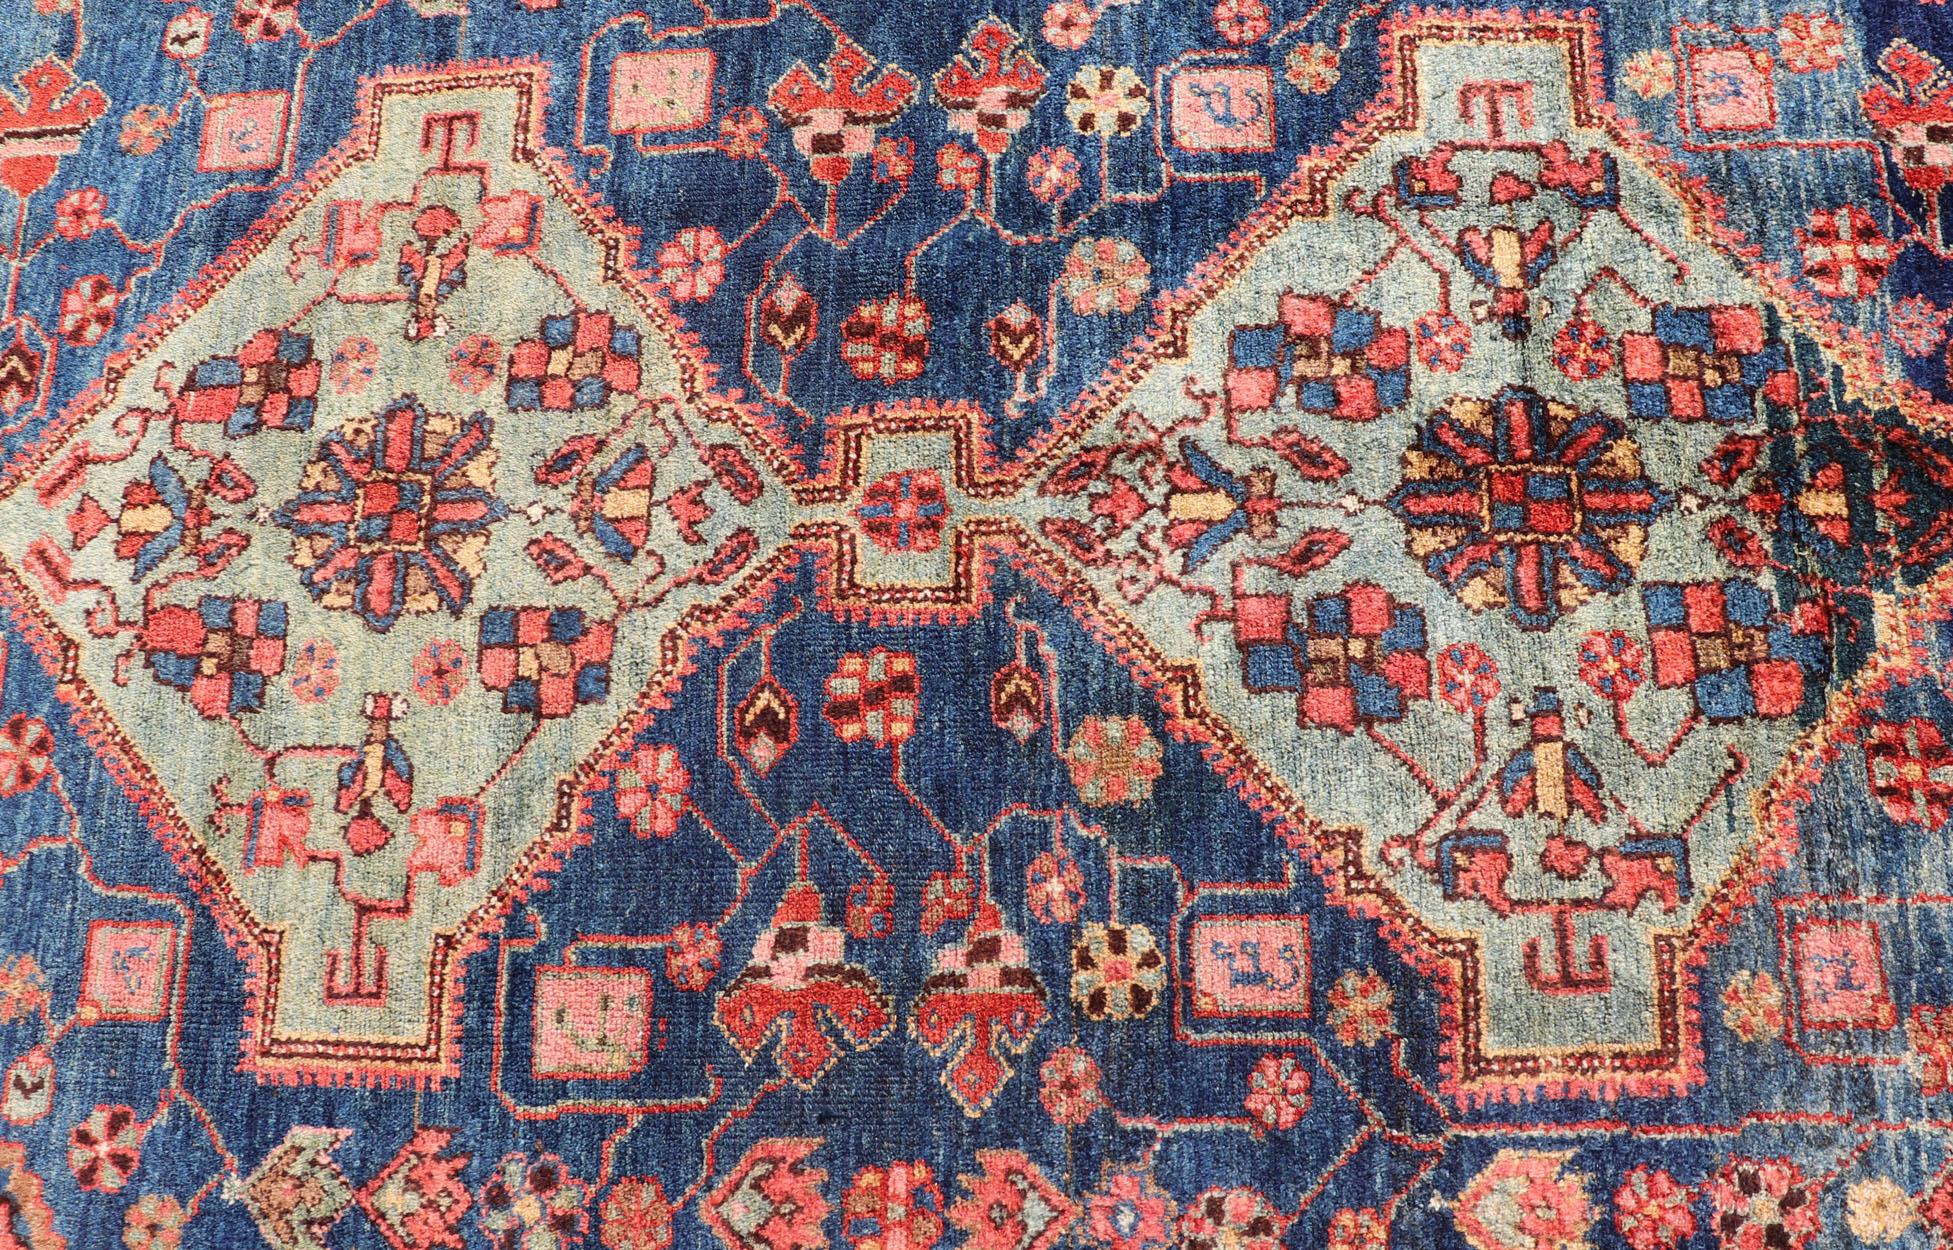 Serapi Antique Persian Karajeh Rug with Geometric Medallions in Green, Blue, and Red